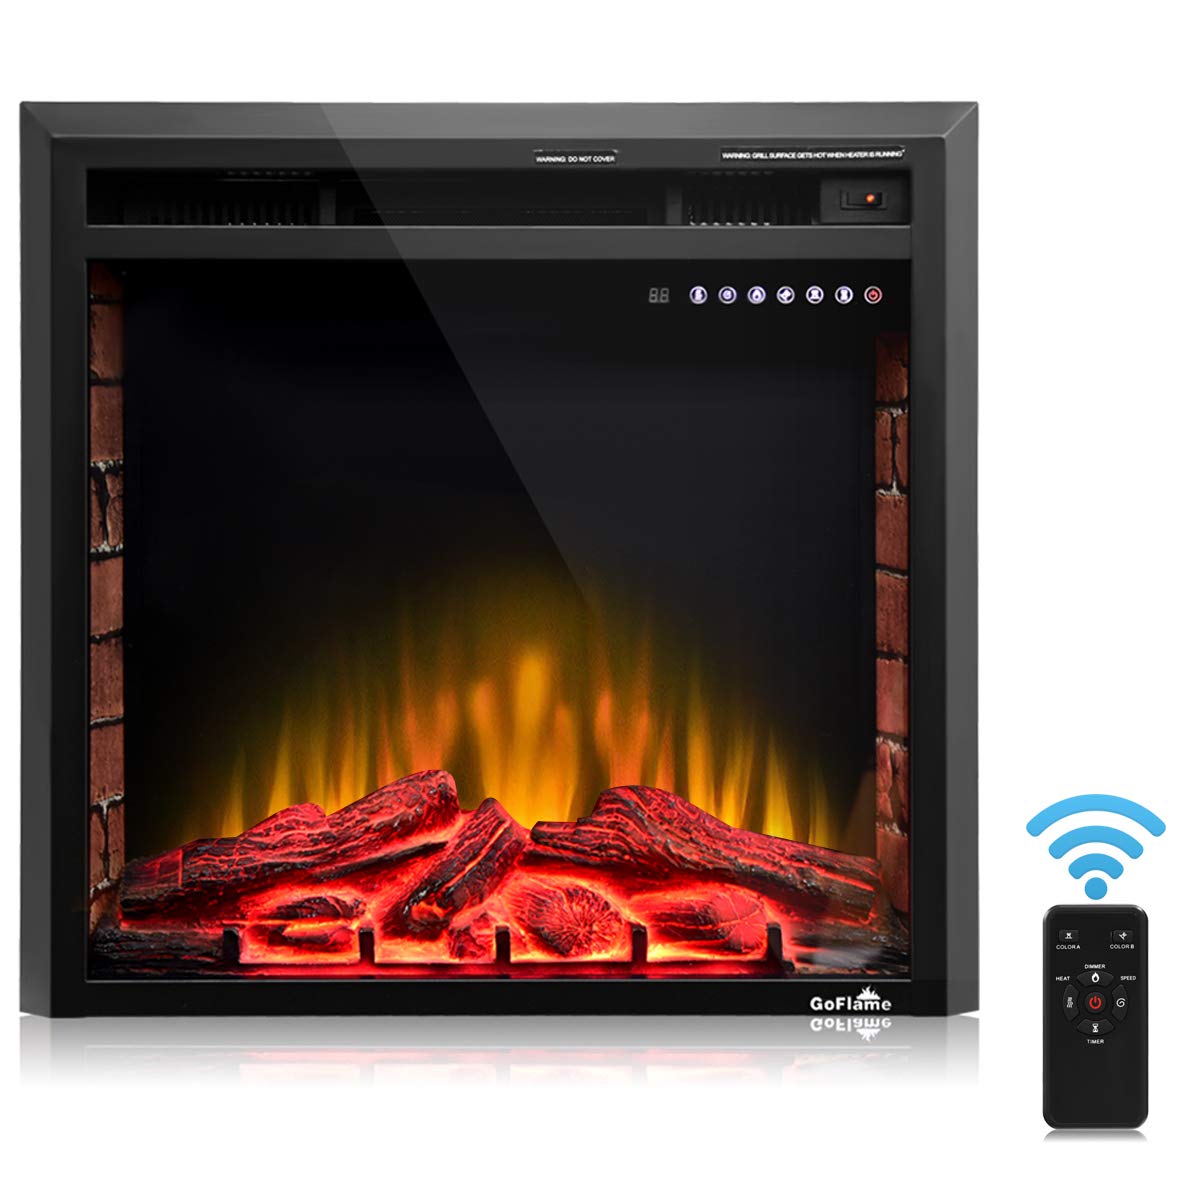 Ventless Electric Fireplace Insert Luxury Best fort Recessed 36" Electric Fireplace Multi Operating Electric Fireplace Insert with Remote 750w 1500w Built In Electric Fireplace